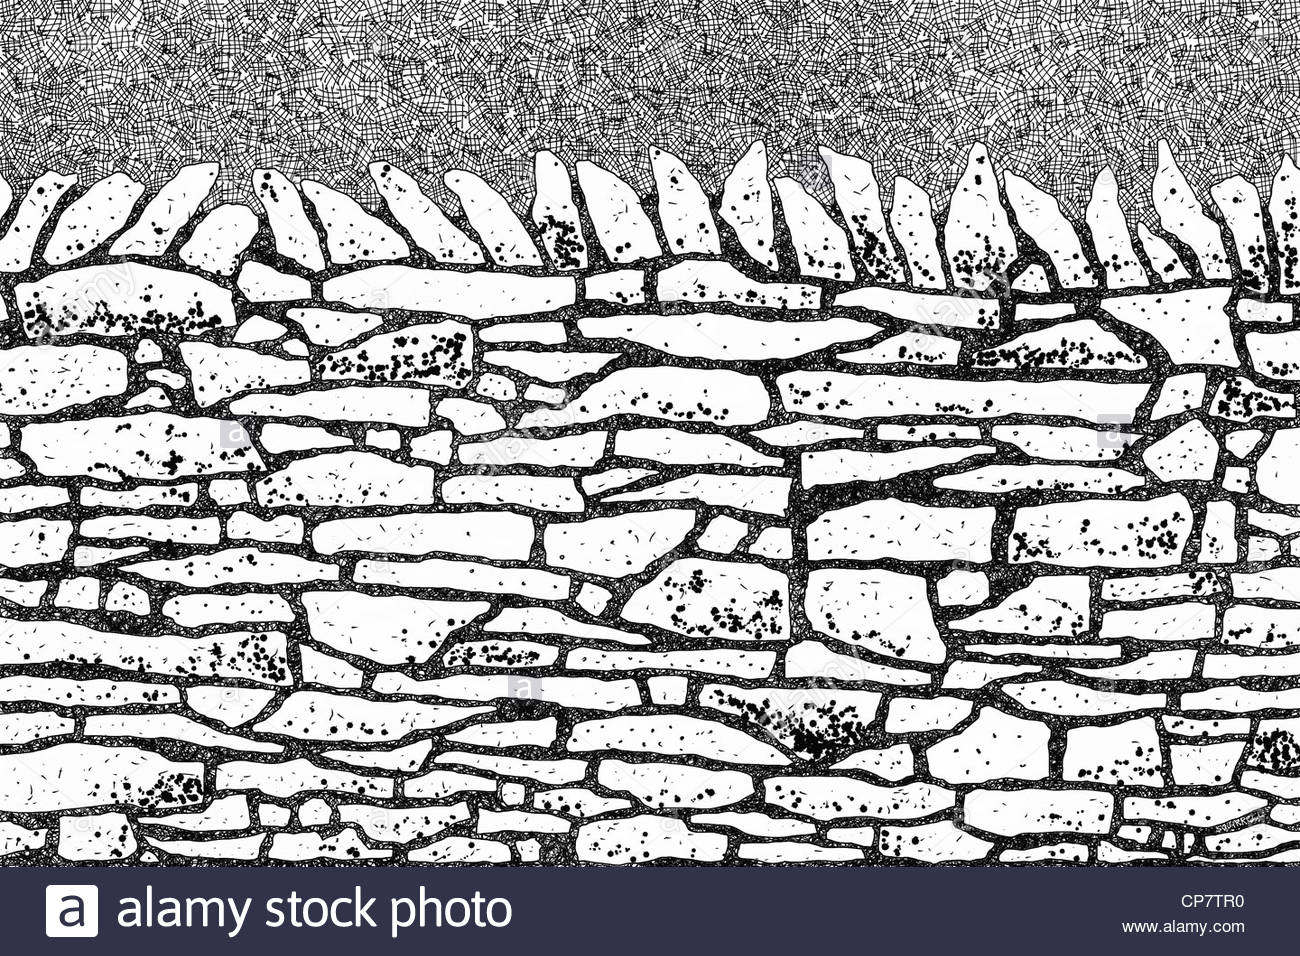 Drawing Of A Dry Stone Wall Stock Photo Alamy